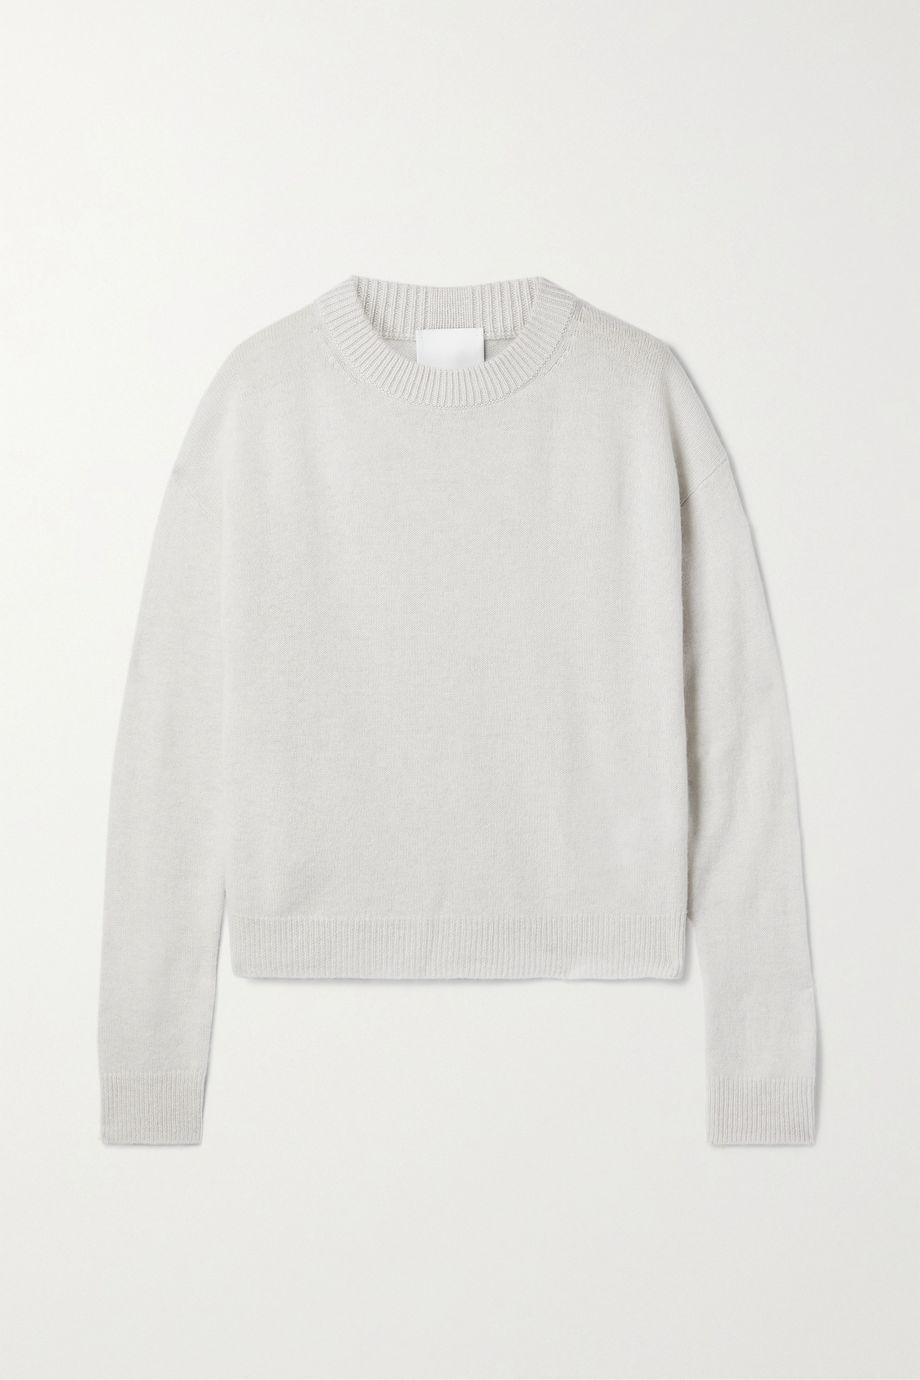 Wool and cashmere-blend sweater by ALLUDE